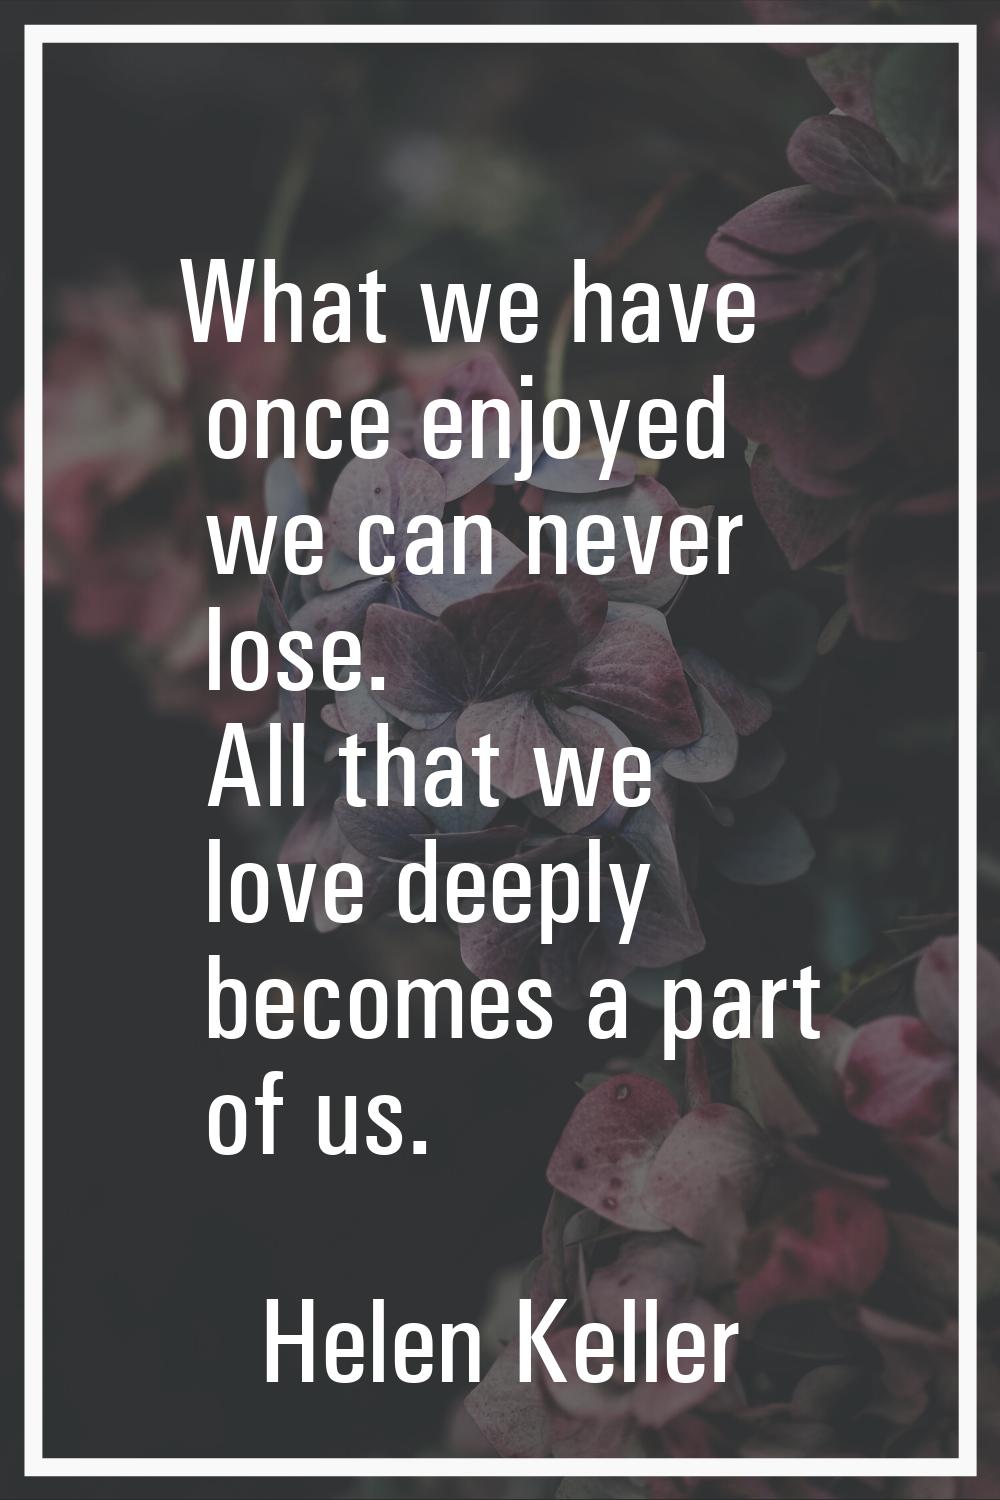 What we have once enjoyed we can never lose. All that we love deeply becomes a part of us.